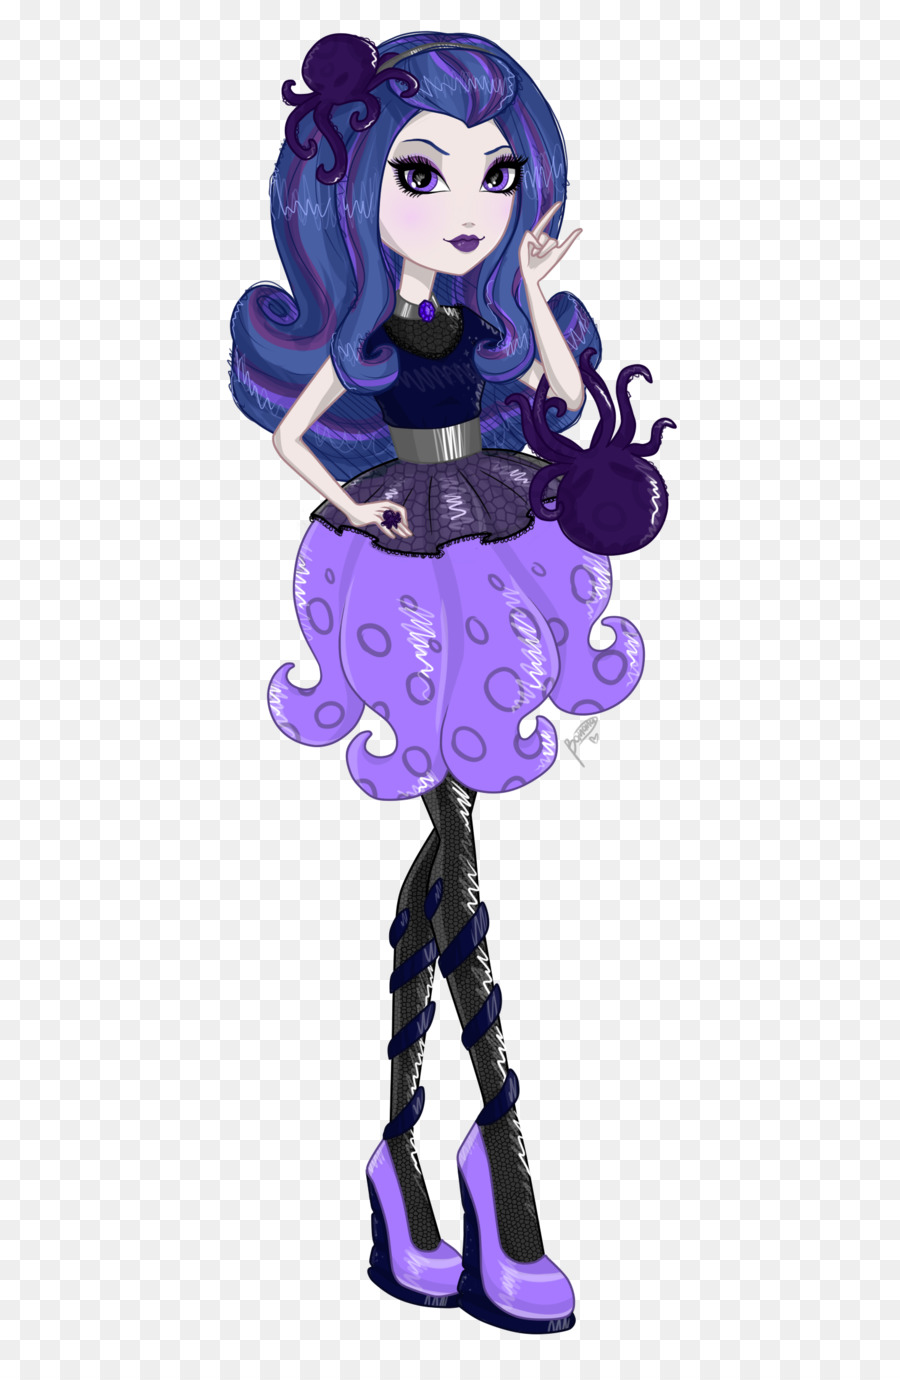 The Little Mermaid Ursula Sea witch Ever After High Witchcraft - Ever after high legacy day png download - 586*1364 - Free Transparent Little Mermaid png Download.